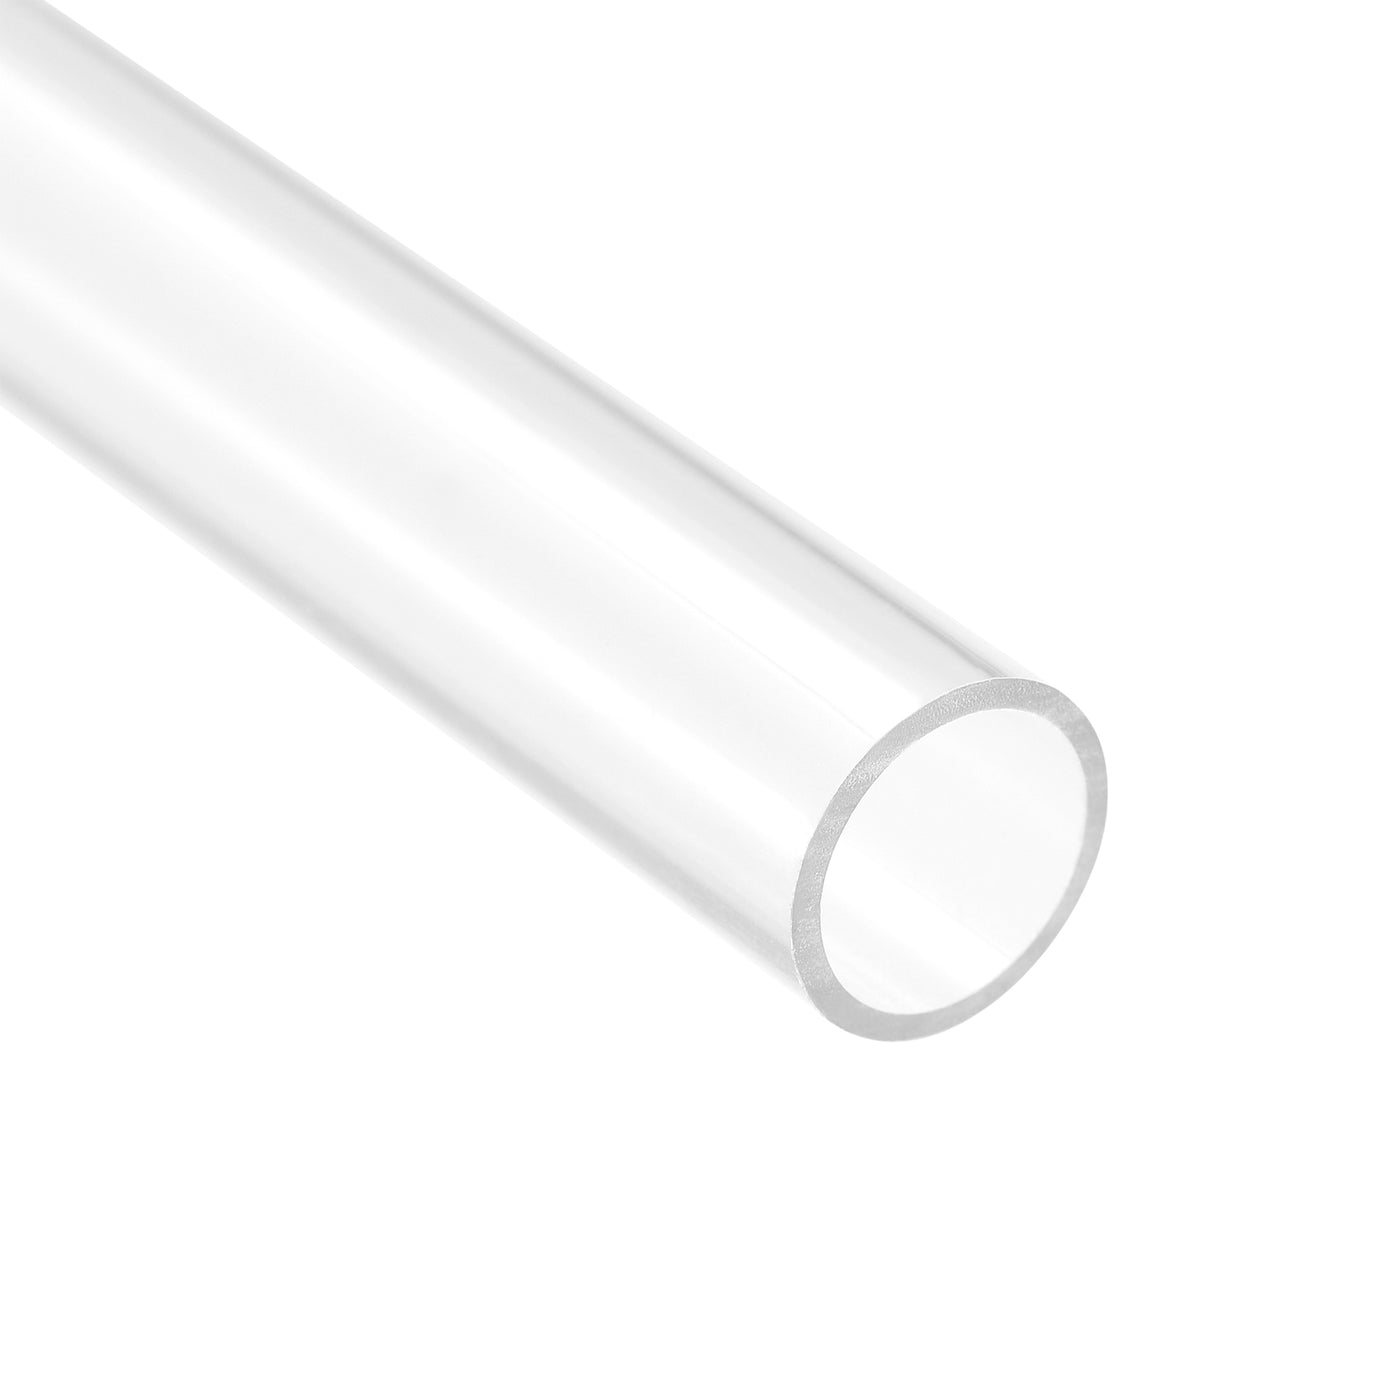 Uxcell Uxcell PC Rigid Round Clear Tubing 18mm(0.7 Inch)IDx20mm(0.79 Inch)ODx610mm(2Ft) Length Plastic Tube 3pcs